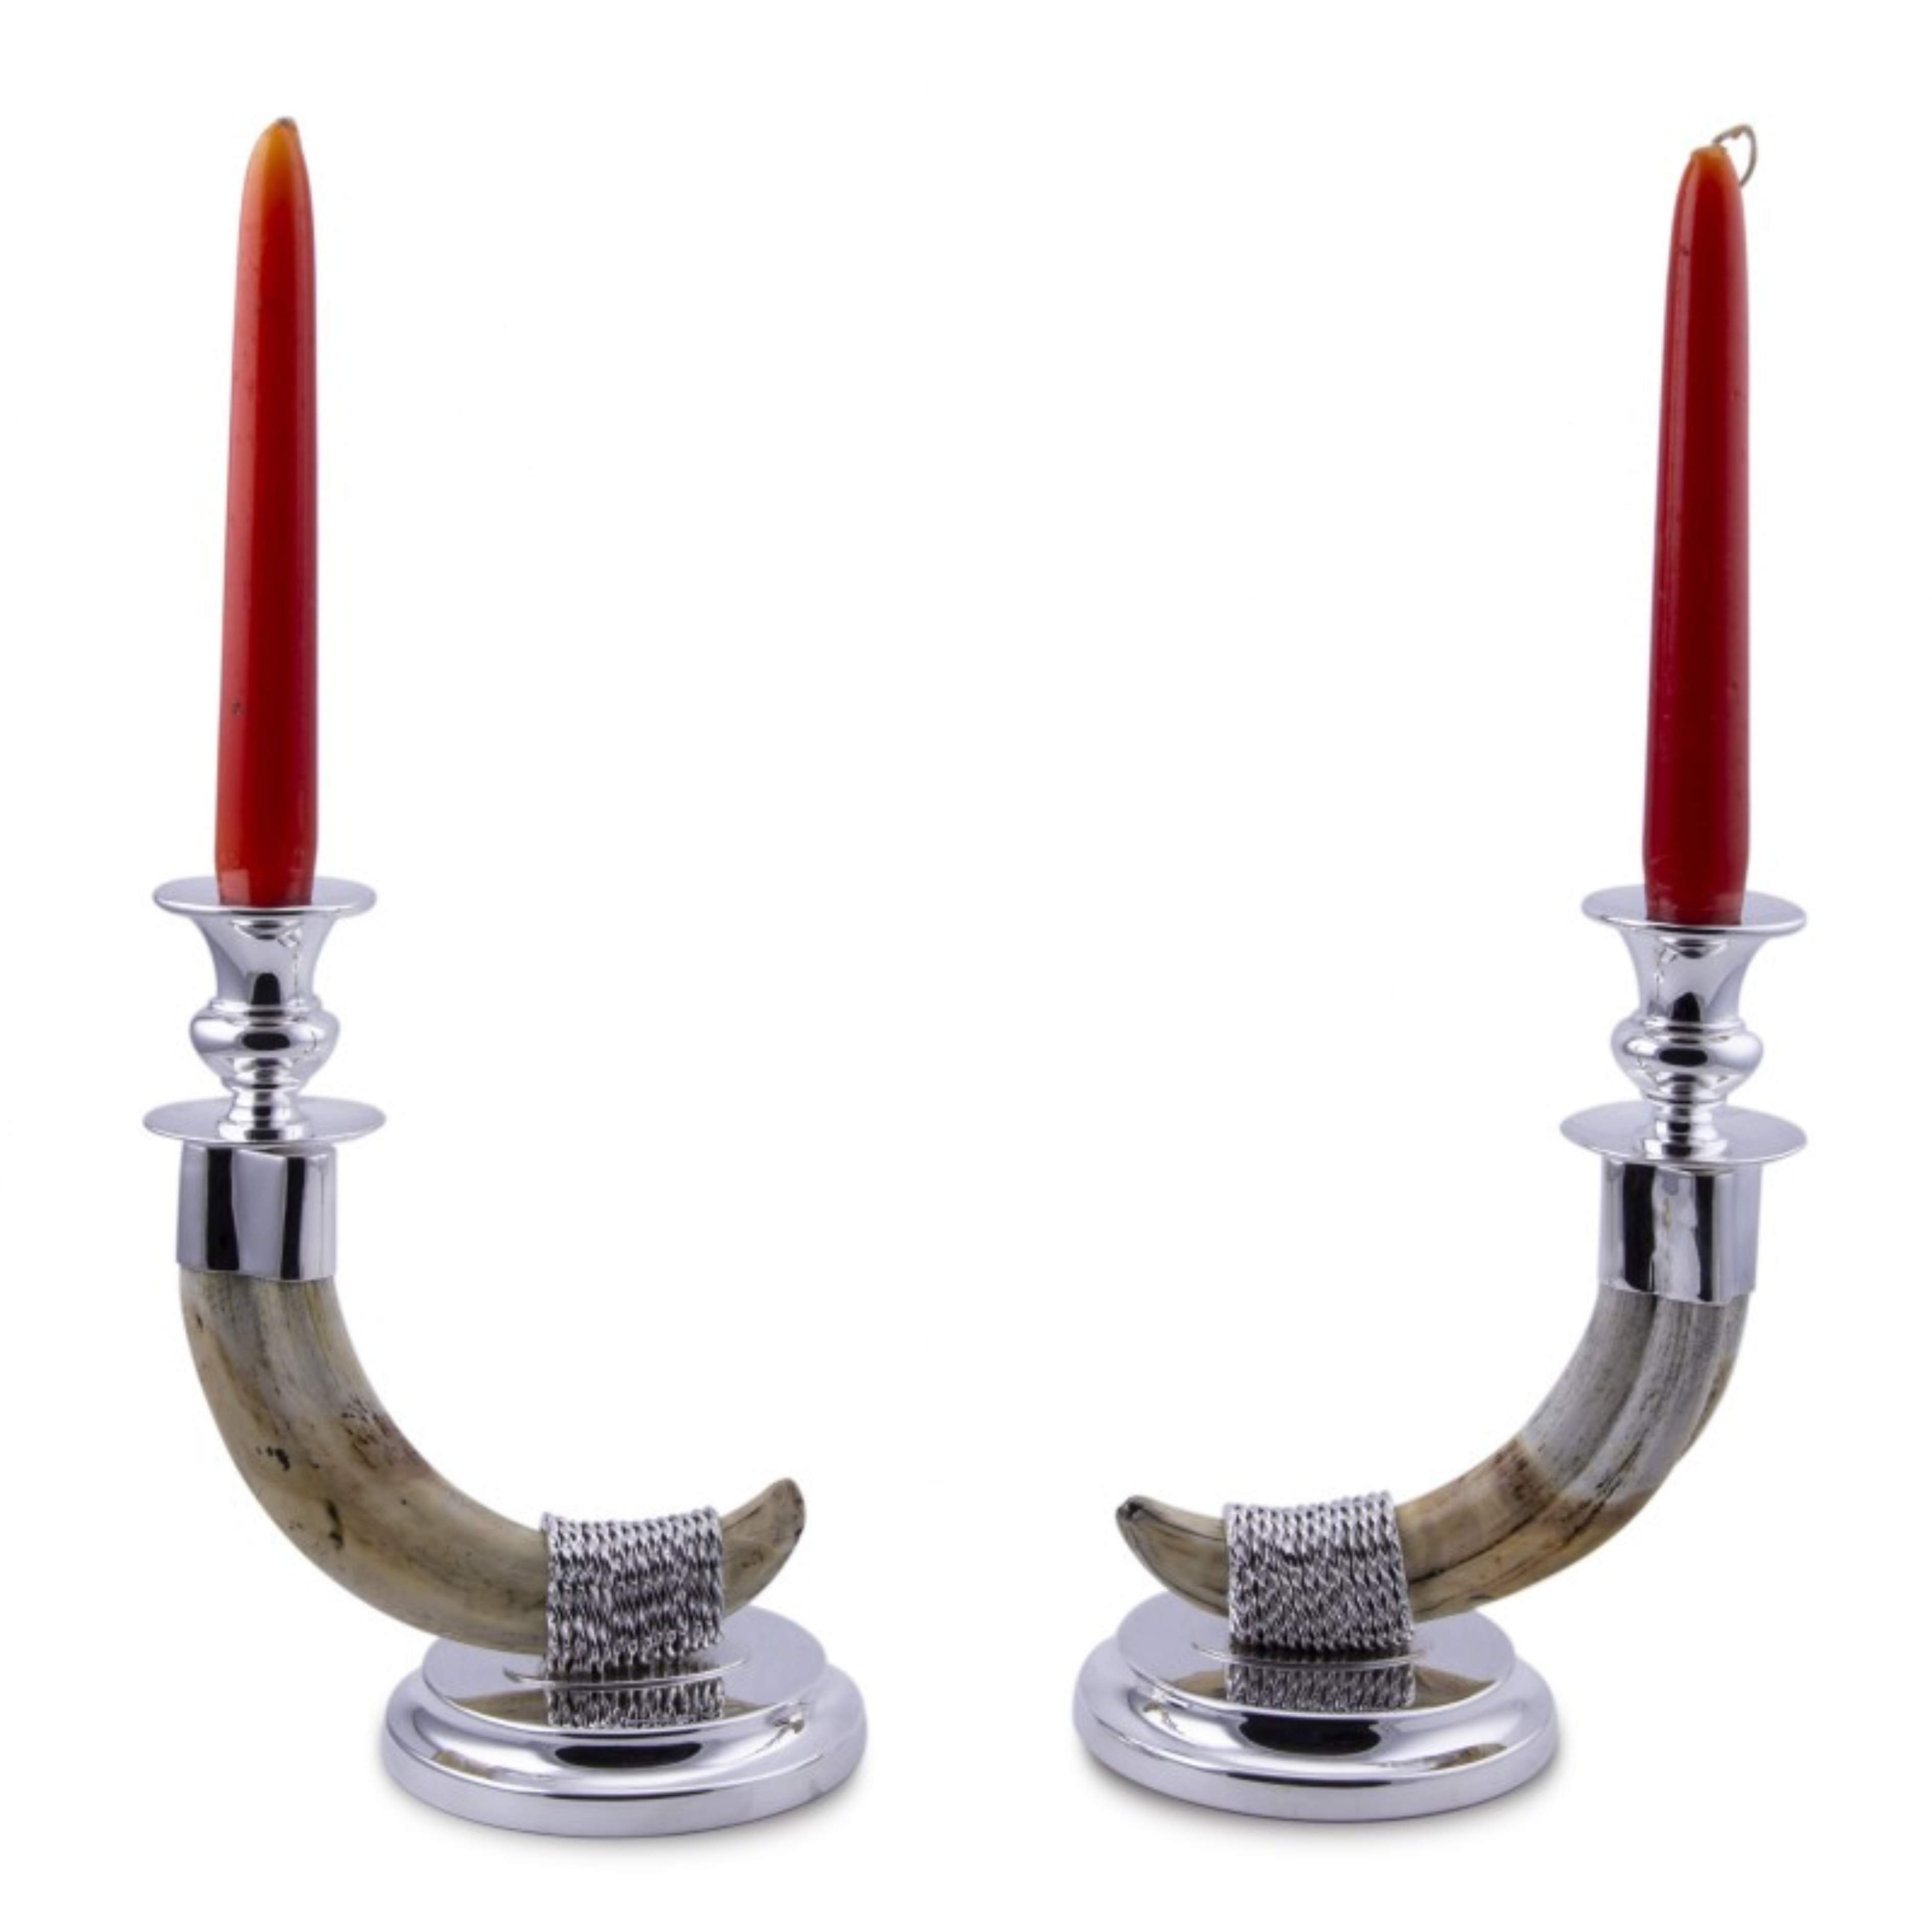 Pair of 925 sterling silver candlesticks with warthog tusk